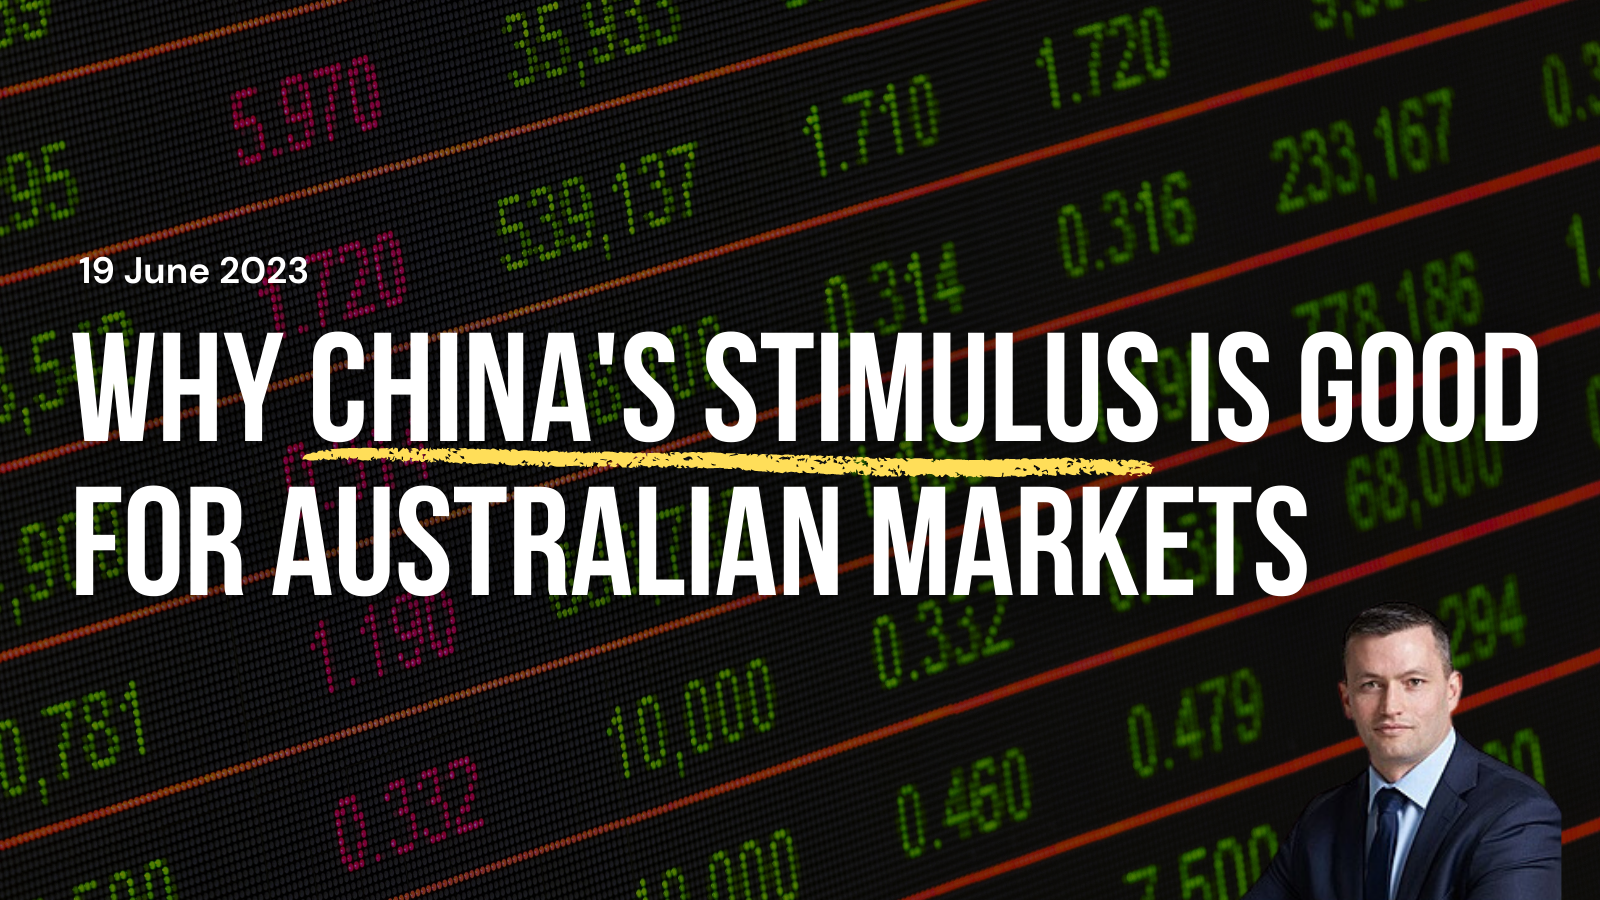 10. china's stimulus is good for australian markets